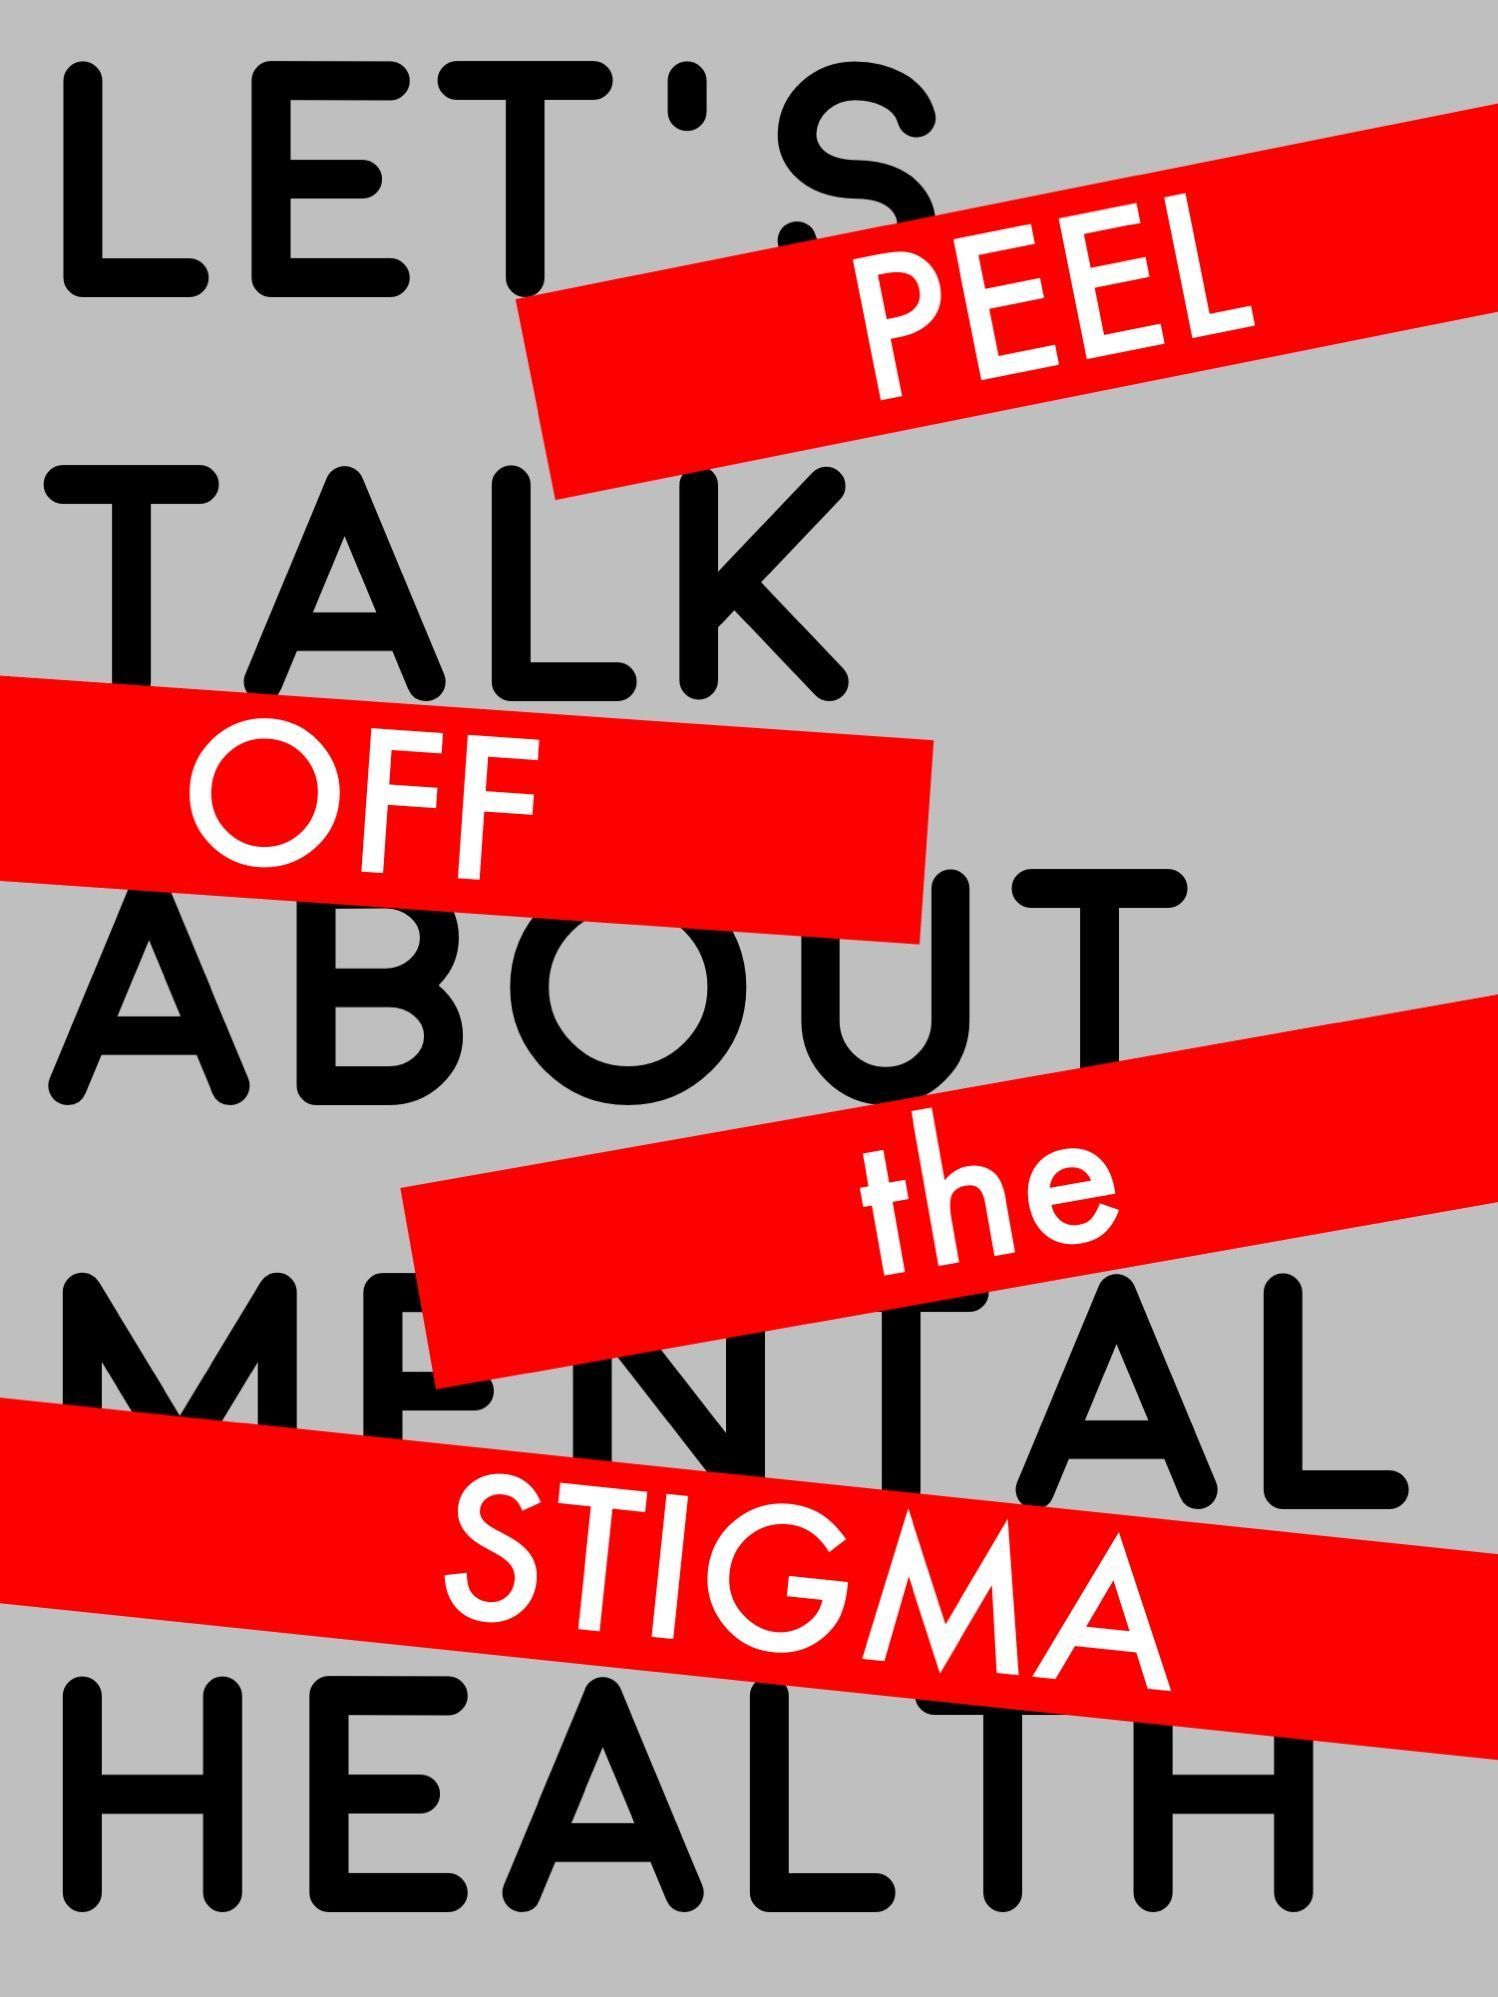 Lets talk about mental health poster